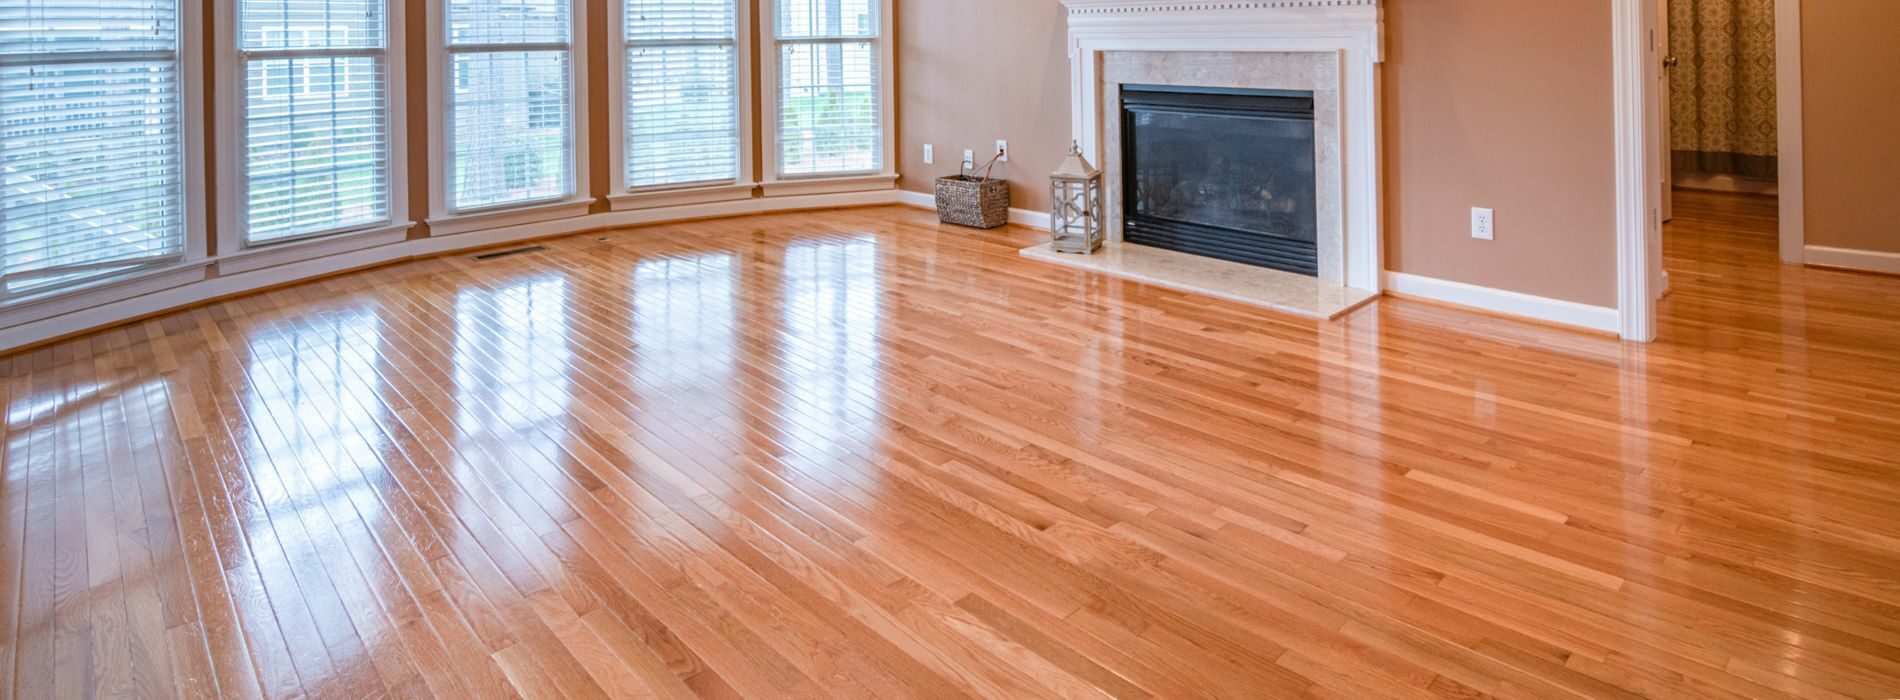 Expertly restored 7-year-old hardwood floor in Kilburn, NW6. Bona 2.2K Frost whitewashing and Traffic HD 15% sheen matte lacquer were used by Mr Sander®. The durable and stunning finish ensures long-lasting beauty.